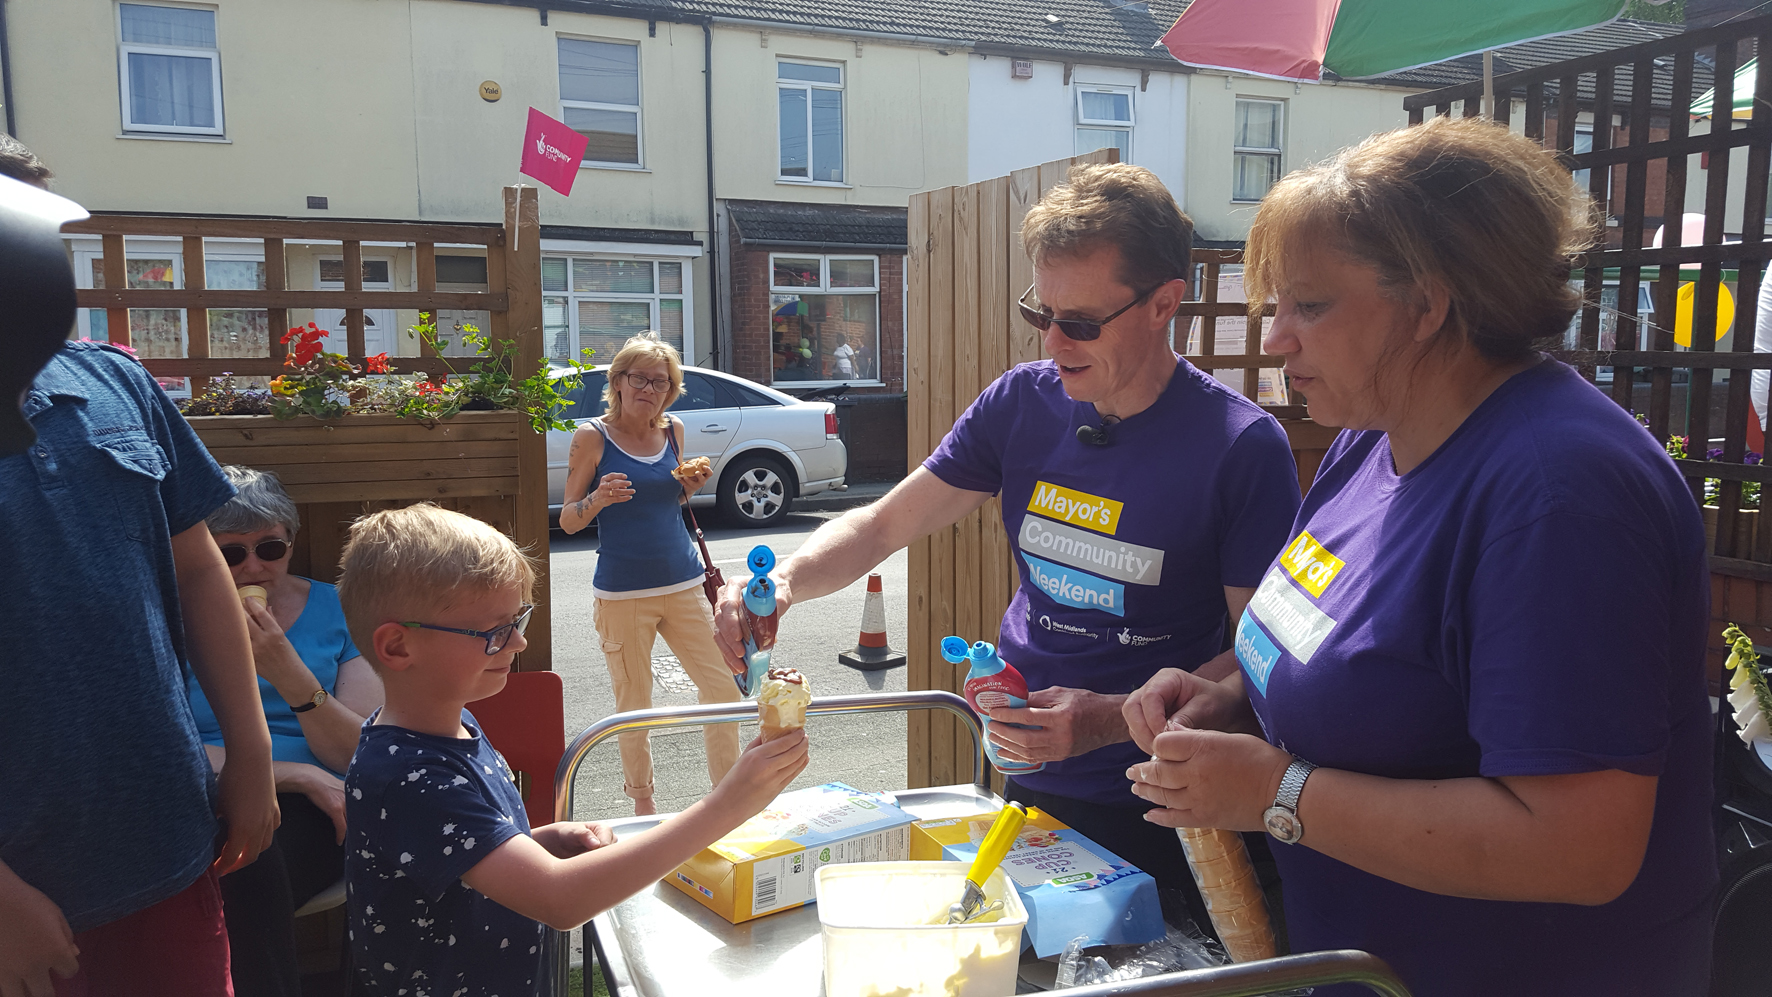 Mayor of the West Midlands Andy Street is pictured serving ice cream during last year's Mayor's Community Weekend